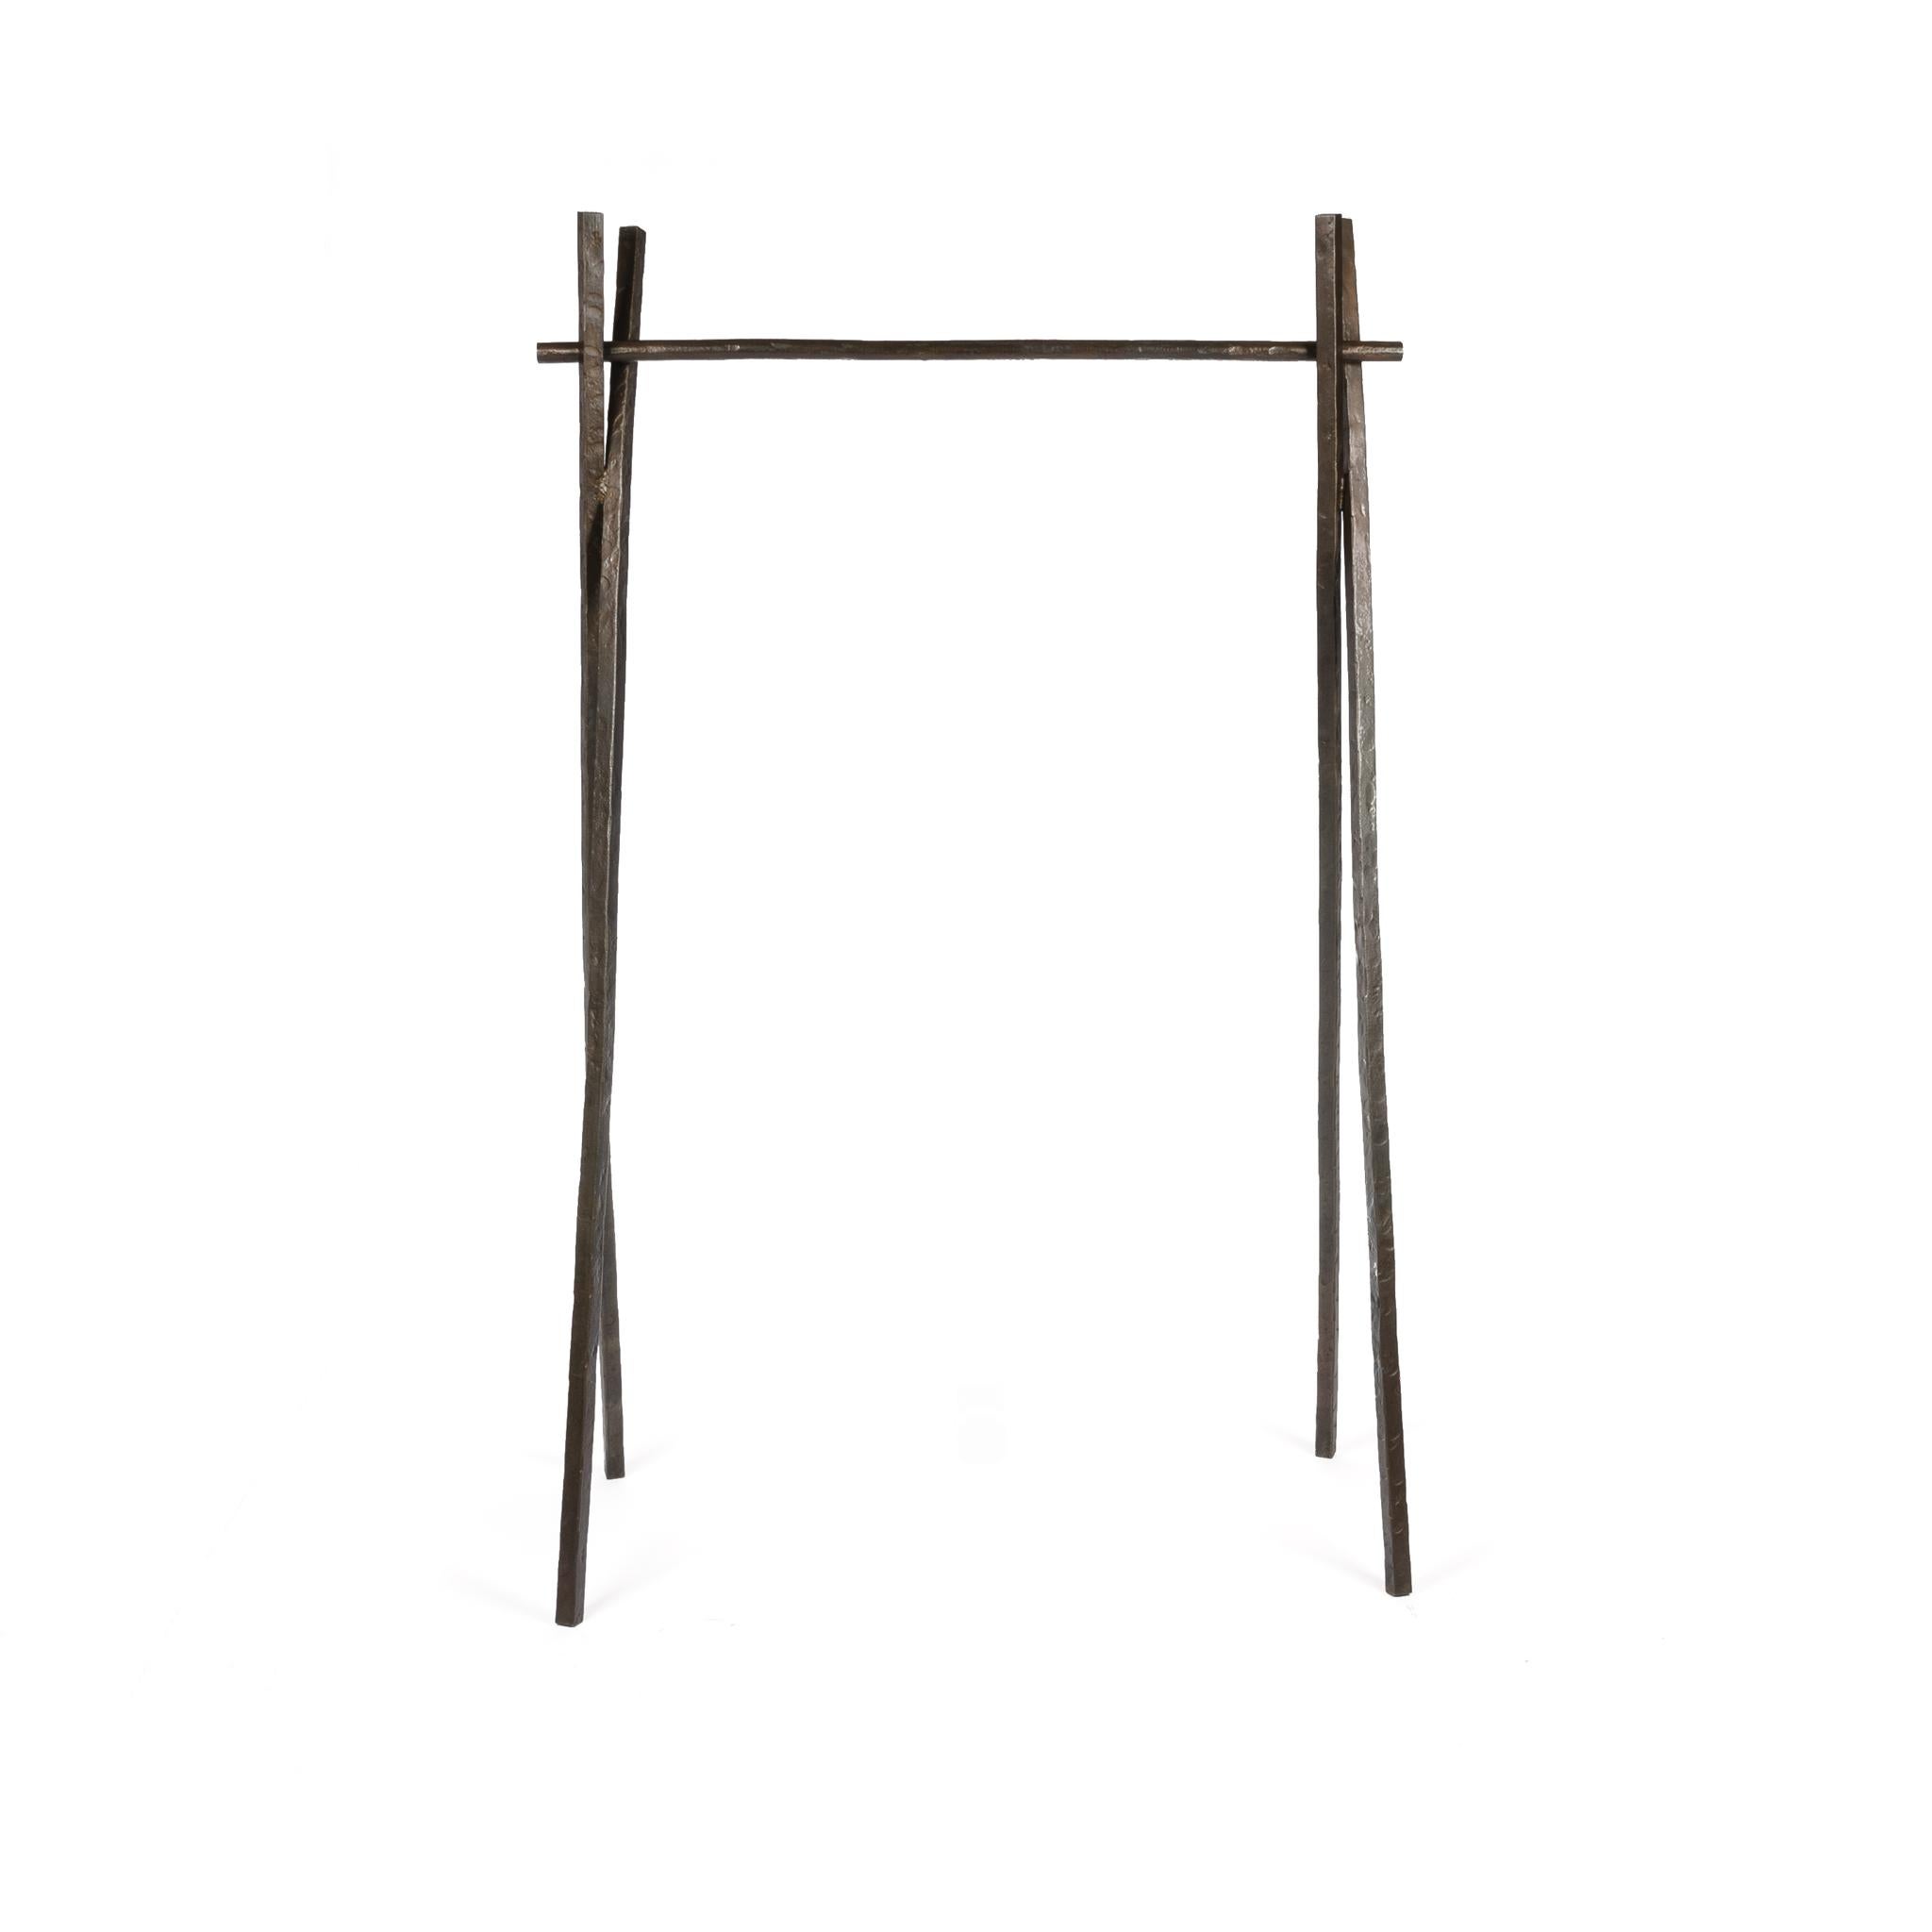 The Arbor rack is an understated hand forged clothing rack, designed by Matt Adams. Perfect for hanging and showcasing your favorite coats. The Arbor rack was originally designed for retail concepts making it ultra durable and stable. It's